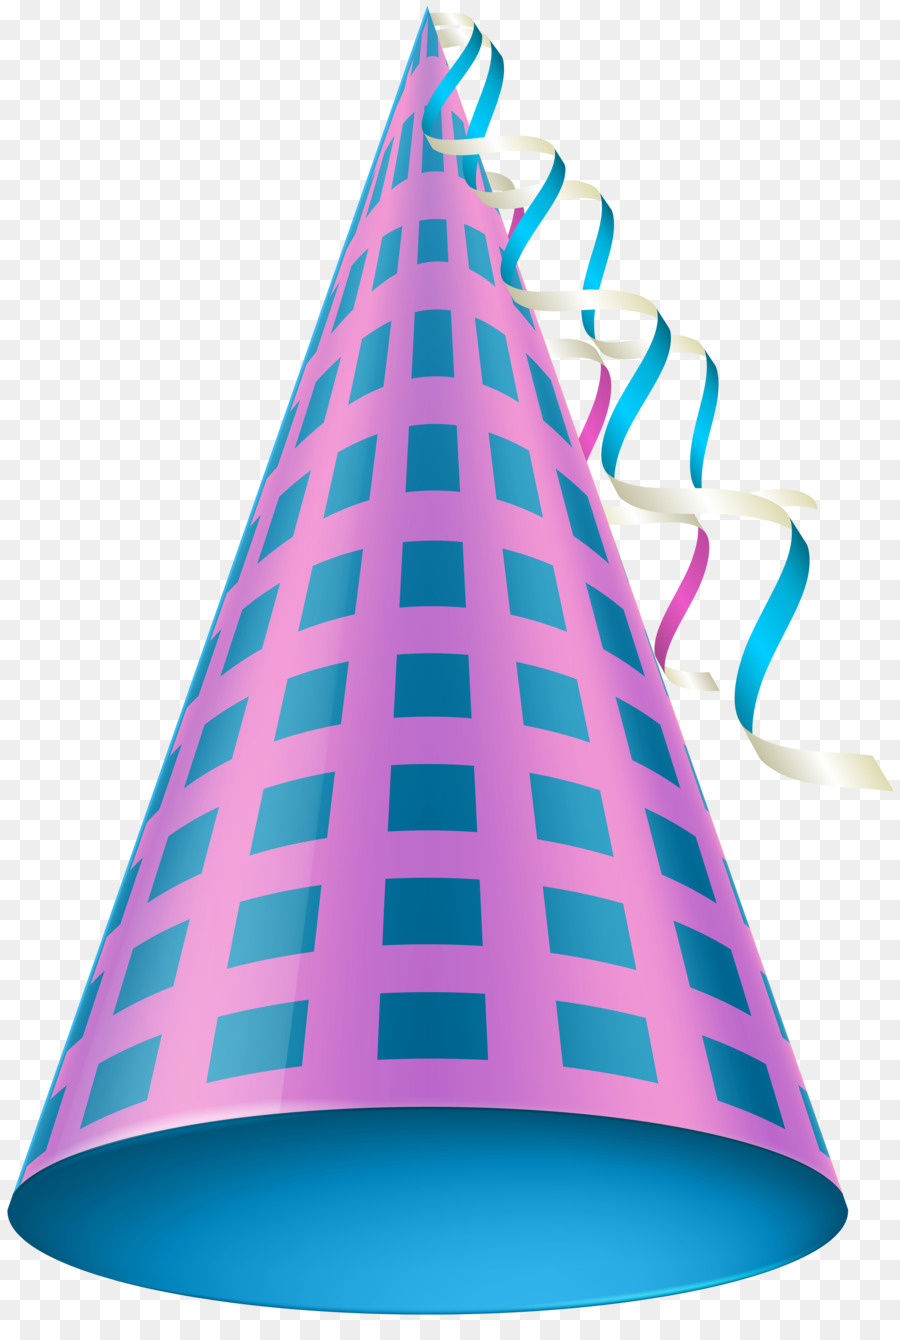 Party hat Birthday Clip art - Pointy Hat png download - 5447*8000 - Free Transparent Party Hat png Download.